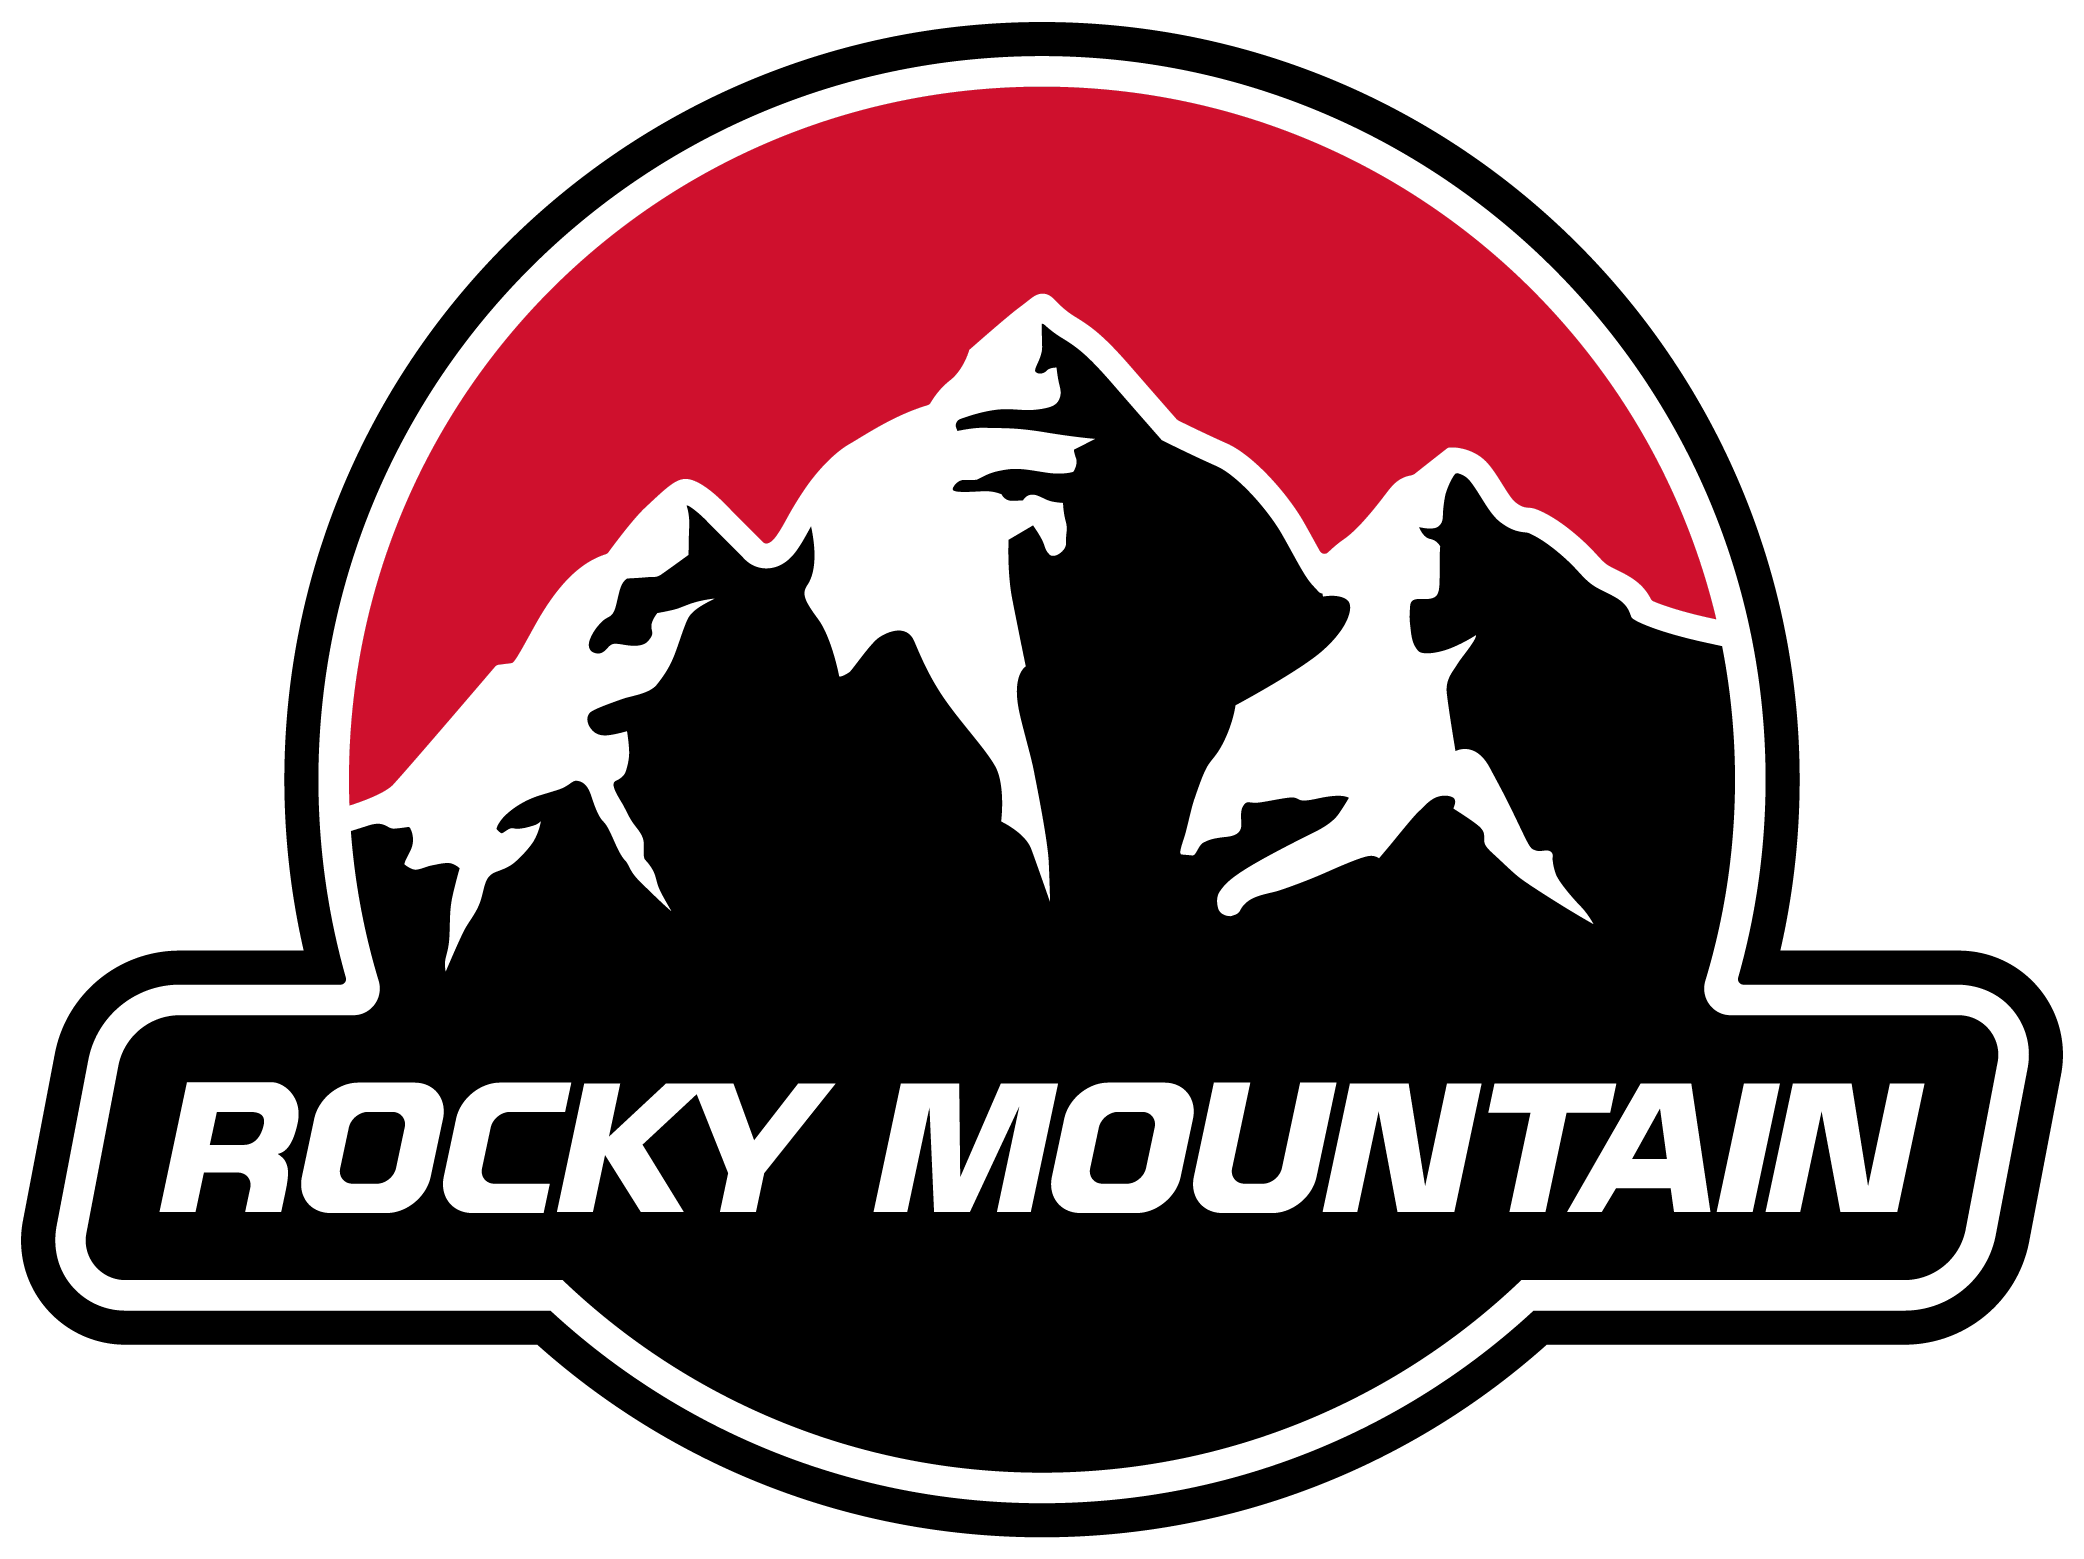 Rocky Mountain Logo Black and Red With Mountains